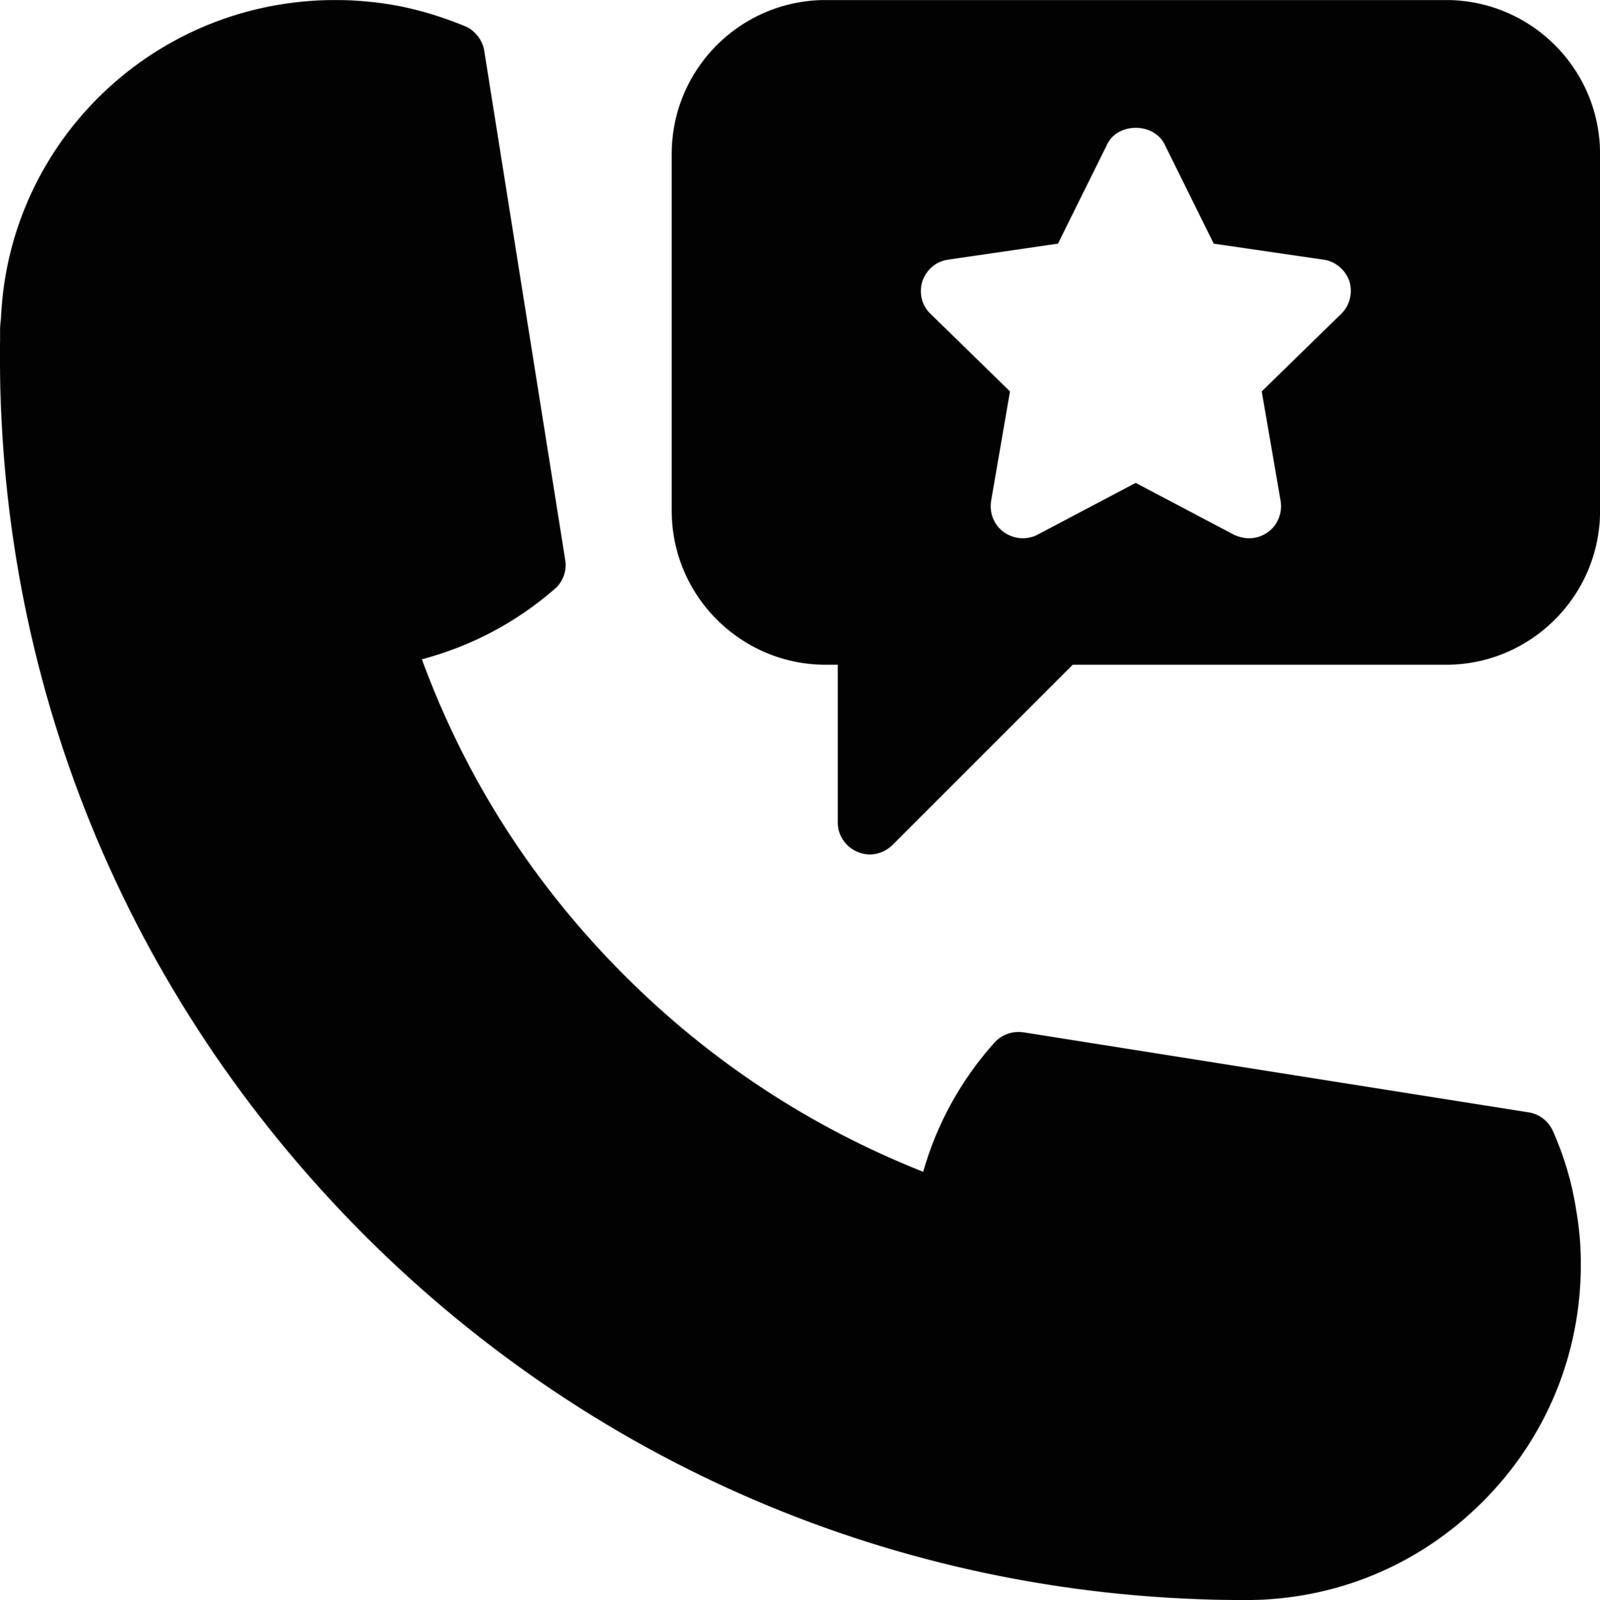 phone call Icon isolated on white background. Vector illustration. Eps10. Vector icon for website design and app